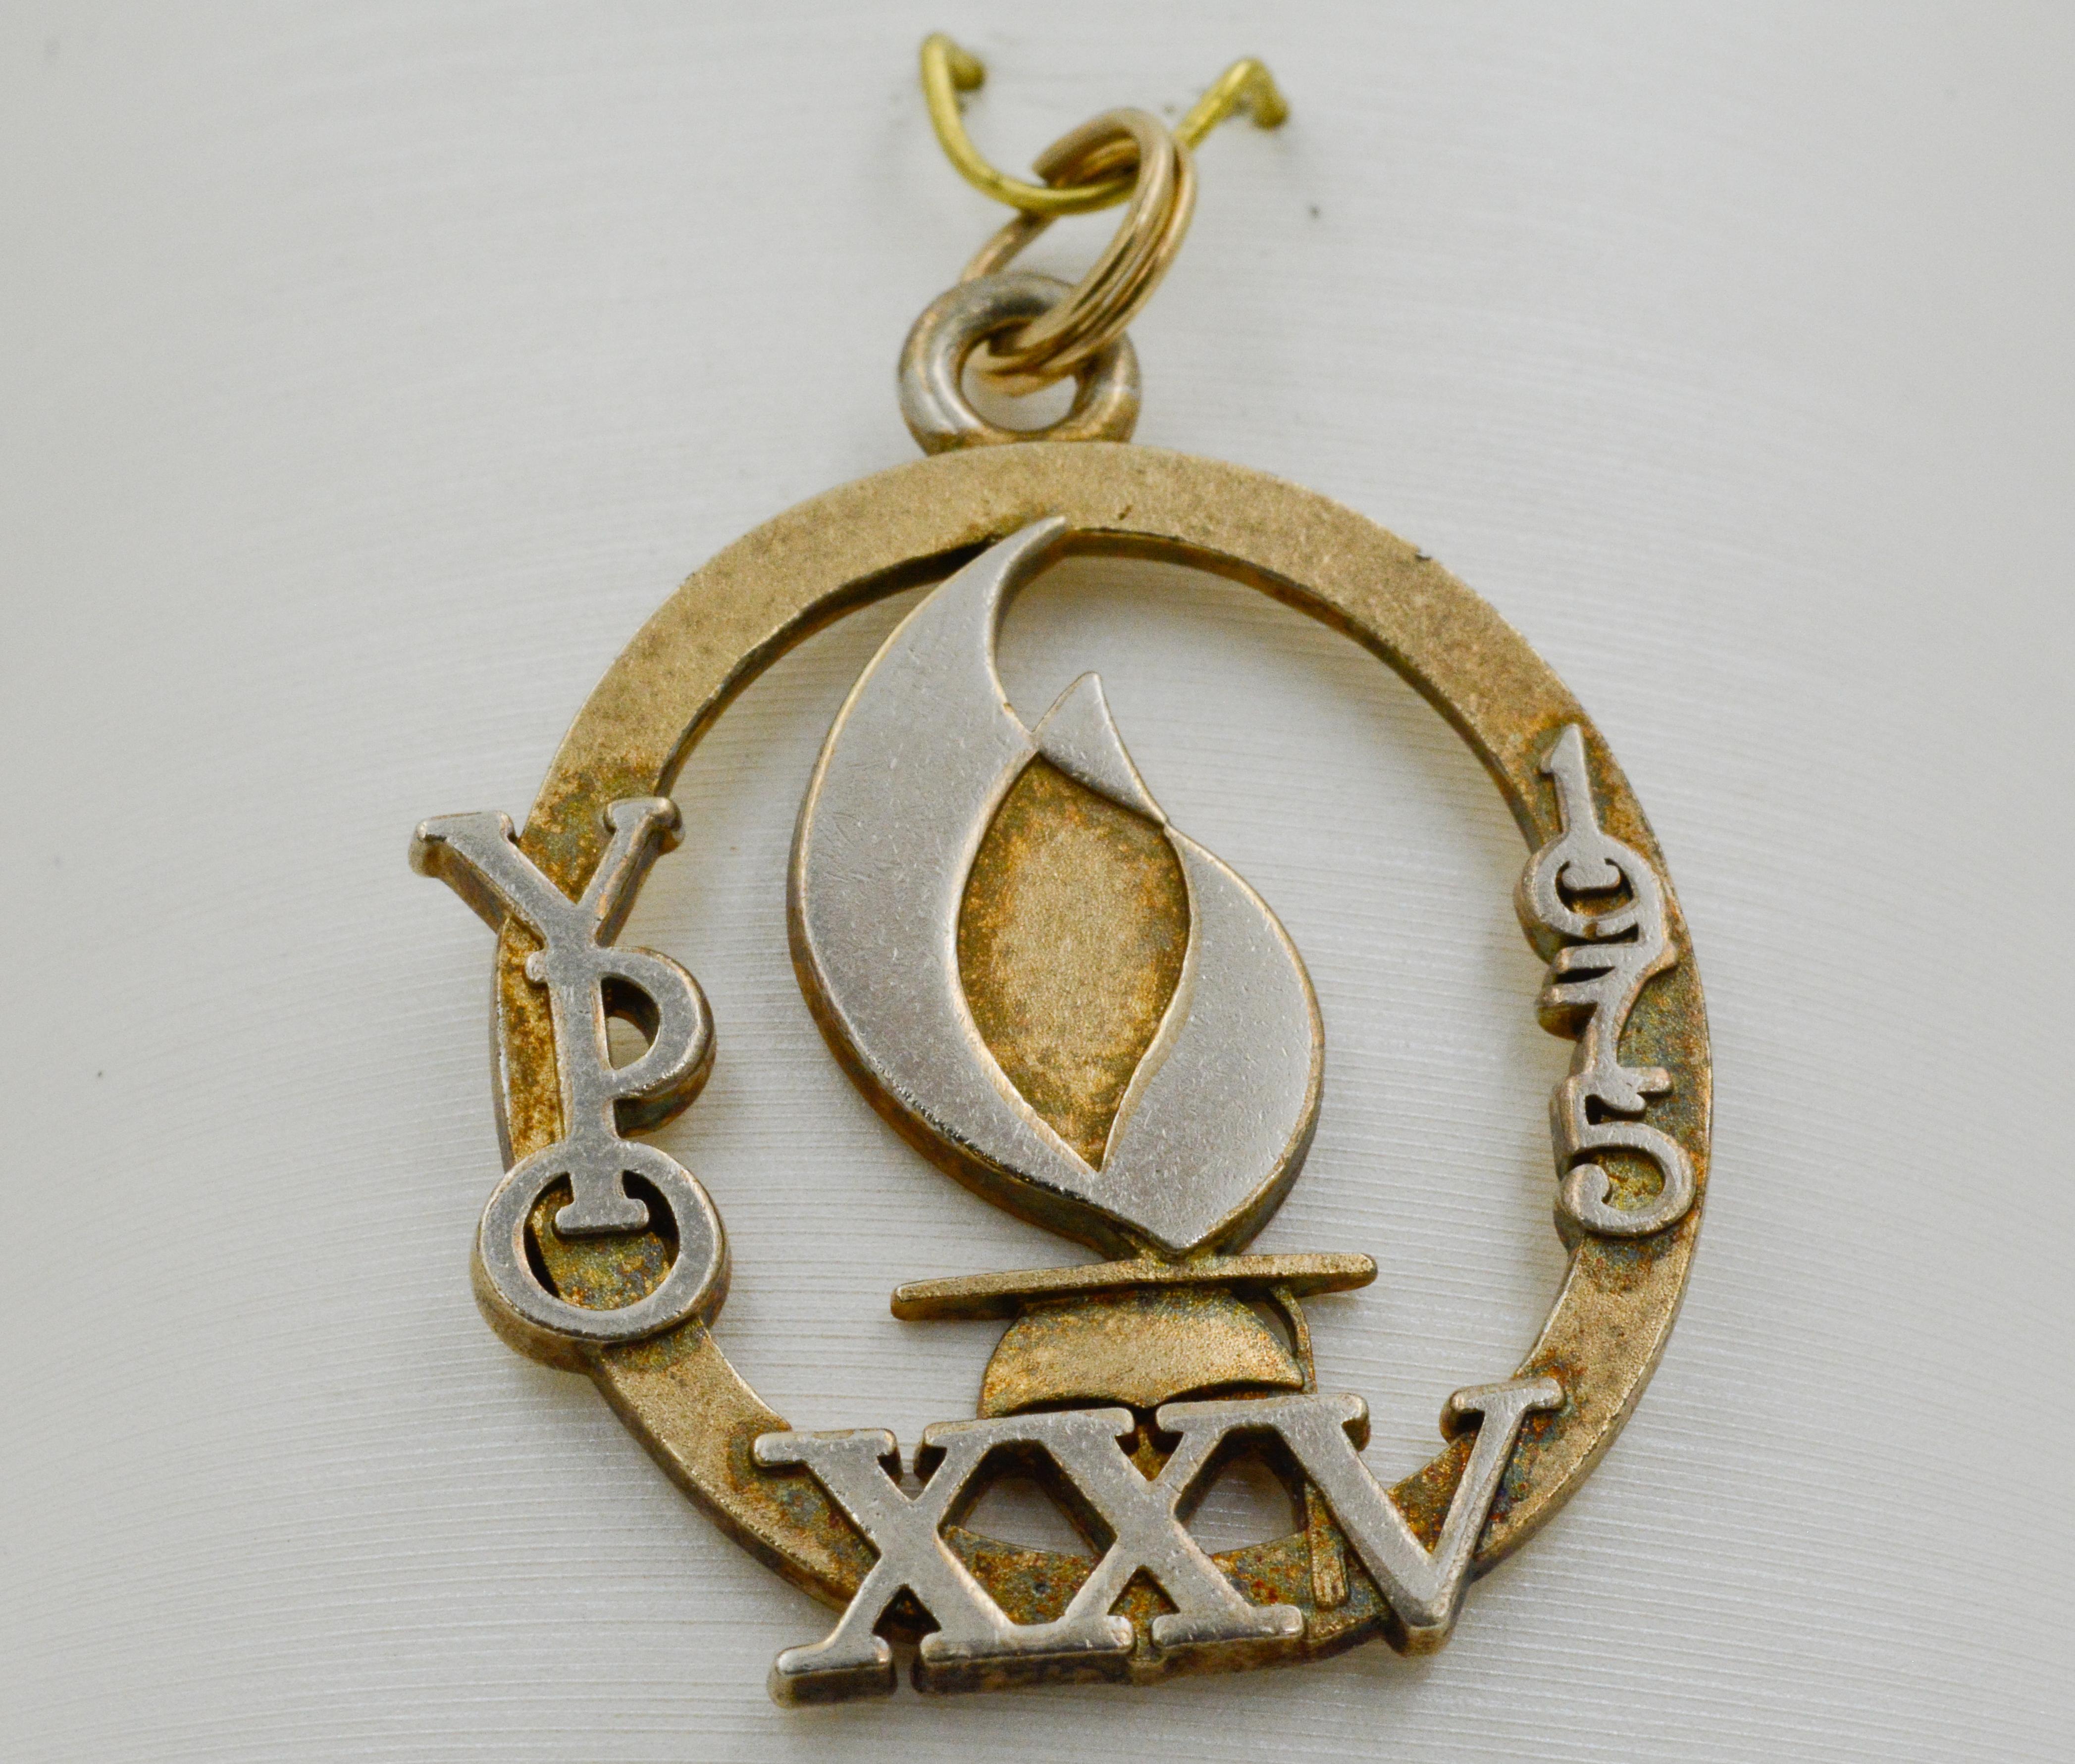 This charm is plated with sterling silver and yellow gold. The charm features a depiction of a flame over Roman numerals XXV. “YPO” and “1975” are incorporated into the charm’s frame, and they round out the regal look while also infusing the charm